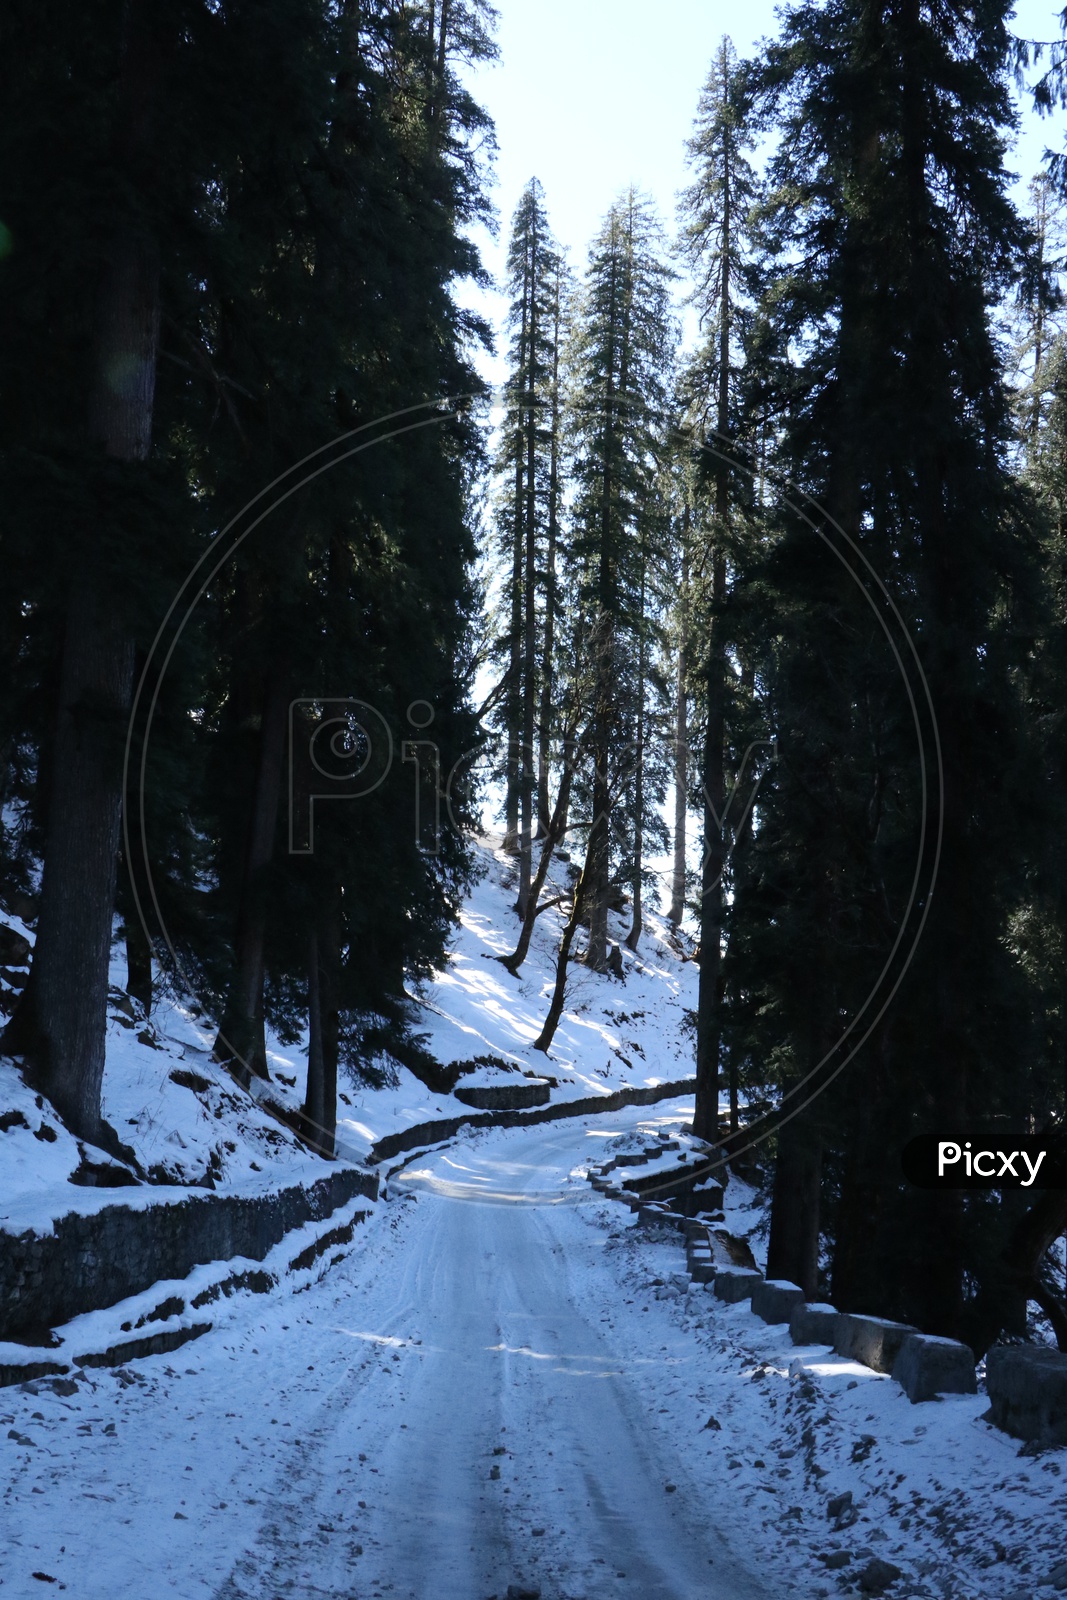 A lonely road full of snow in the hills and pine trees